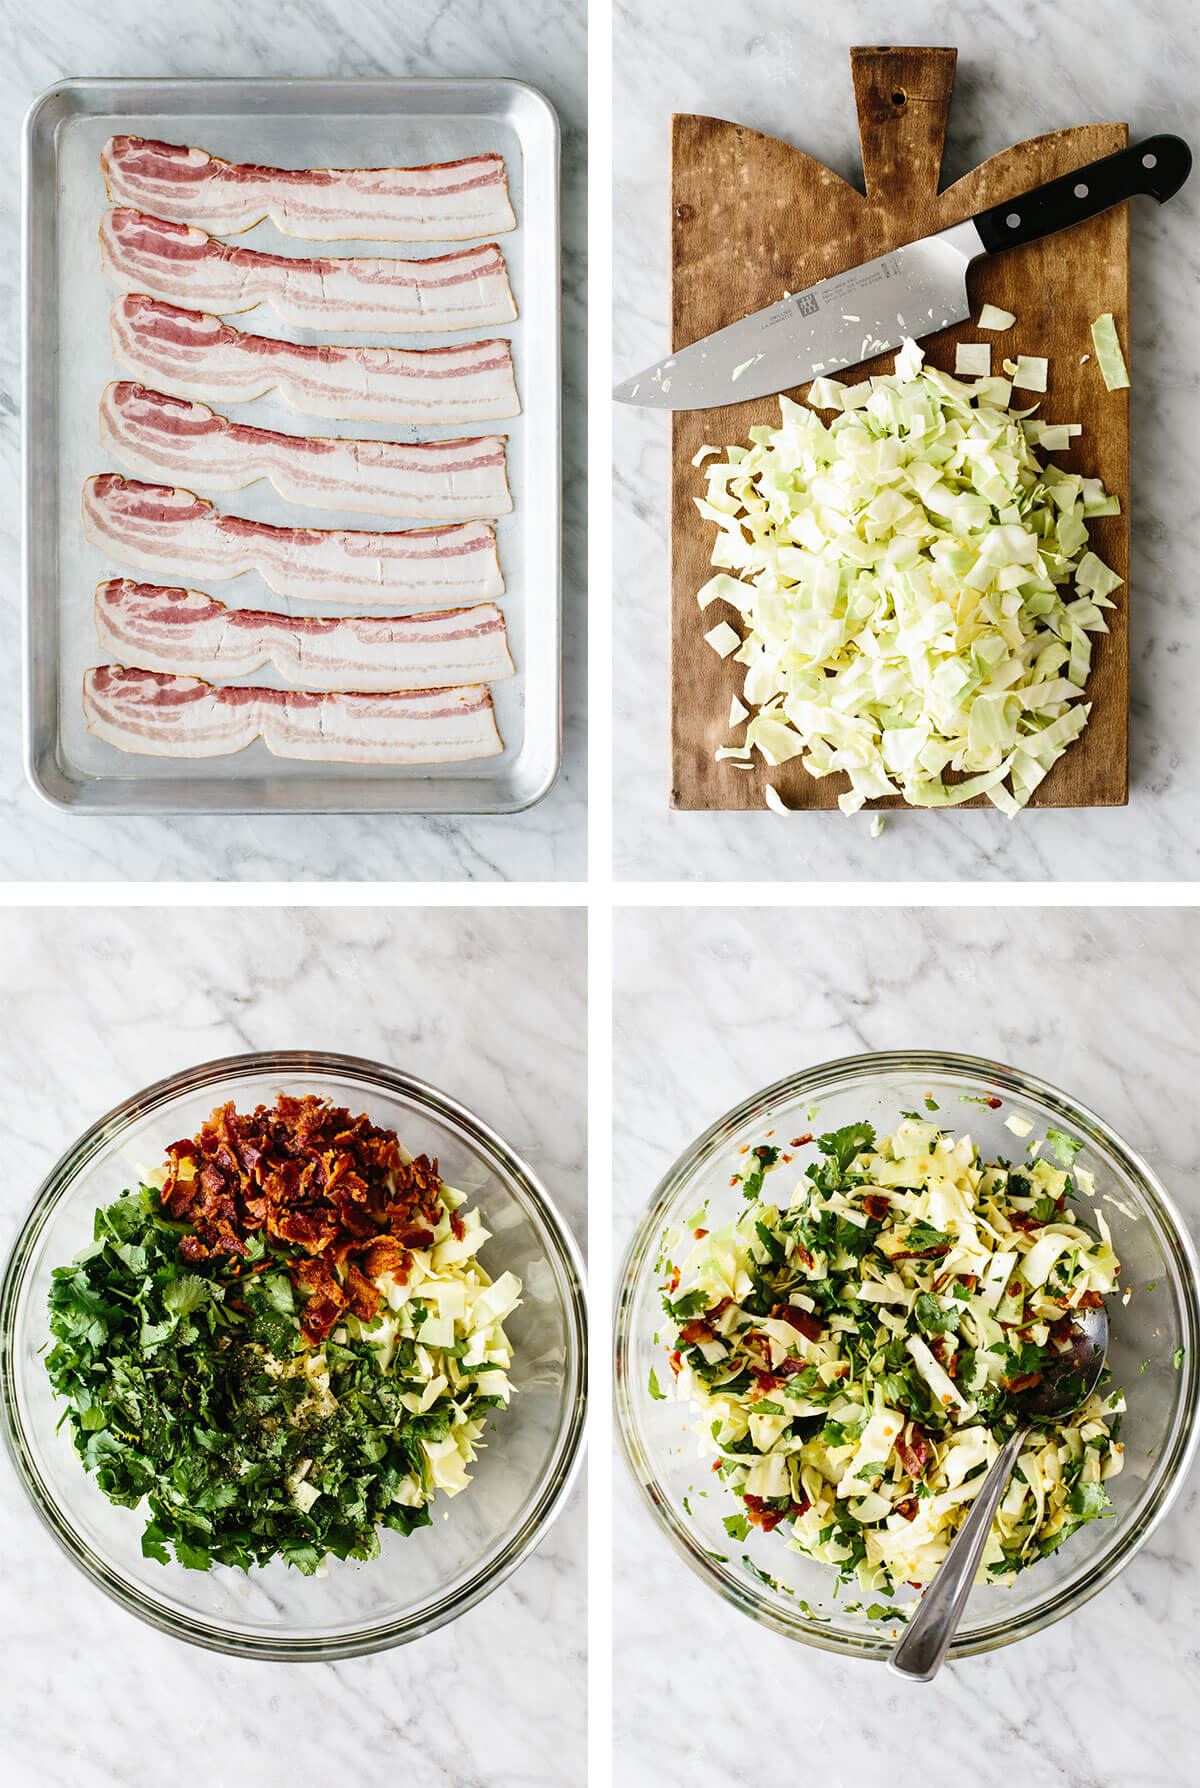 Process of making cilantro lime bacon coleslaw